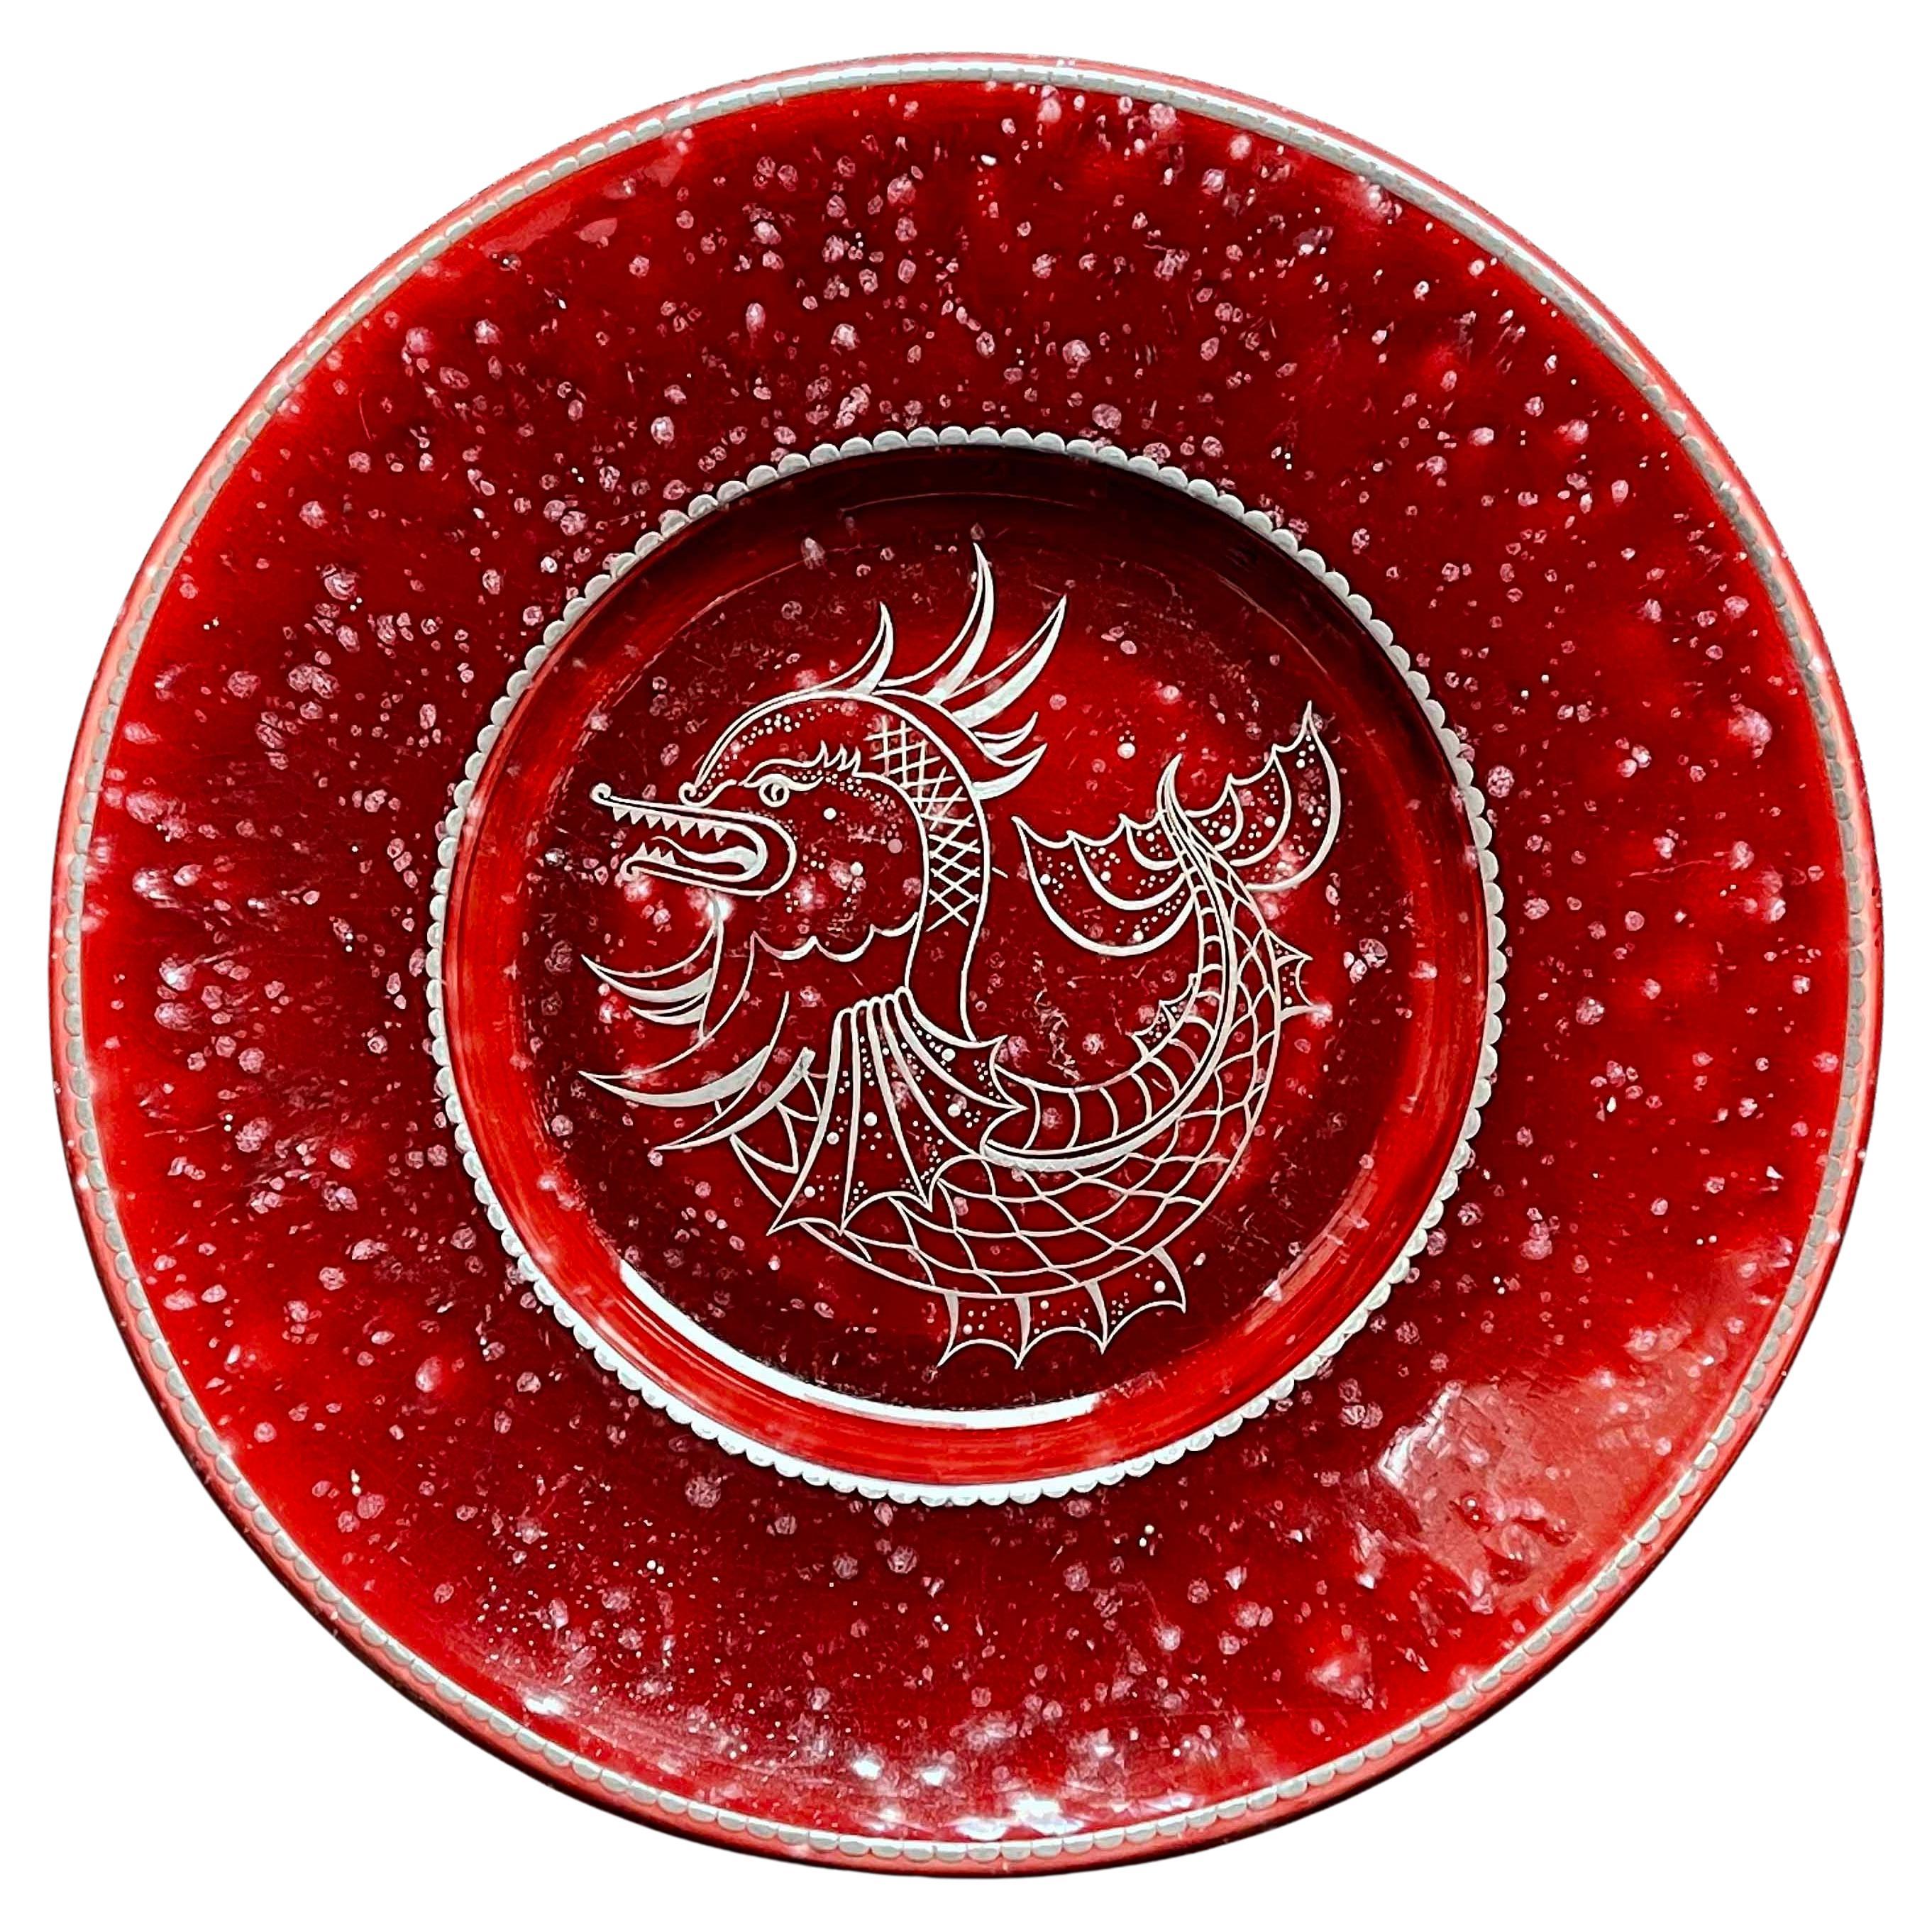 "Sea Dragon", Art Deco Low Bowl w/ Silver Overlay in Rare Red Glaze, Argenta For Sale